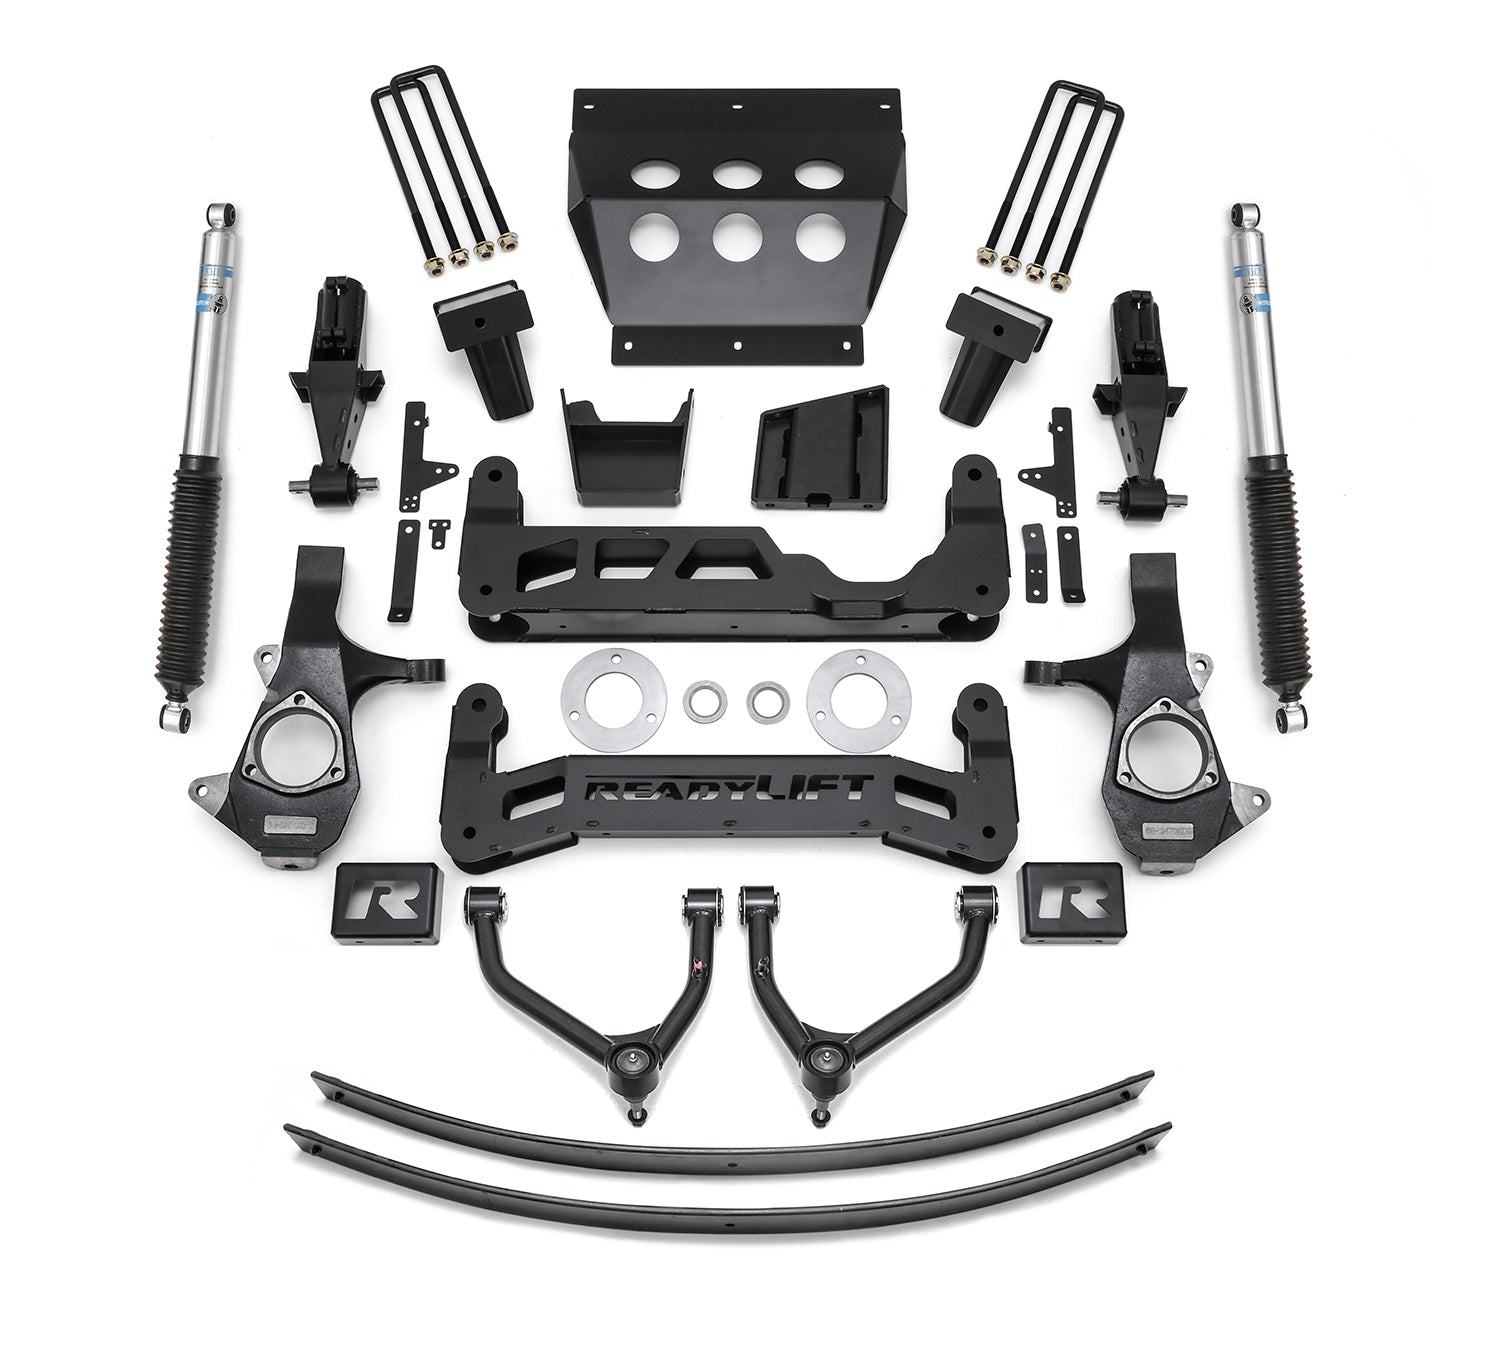 ReadyLift 44-3491 2014-2018 9'' Big Lift Kit for Cast Steel OE Upper Control Arms with Bilstein Shocks